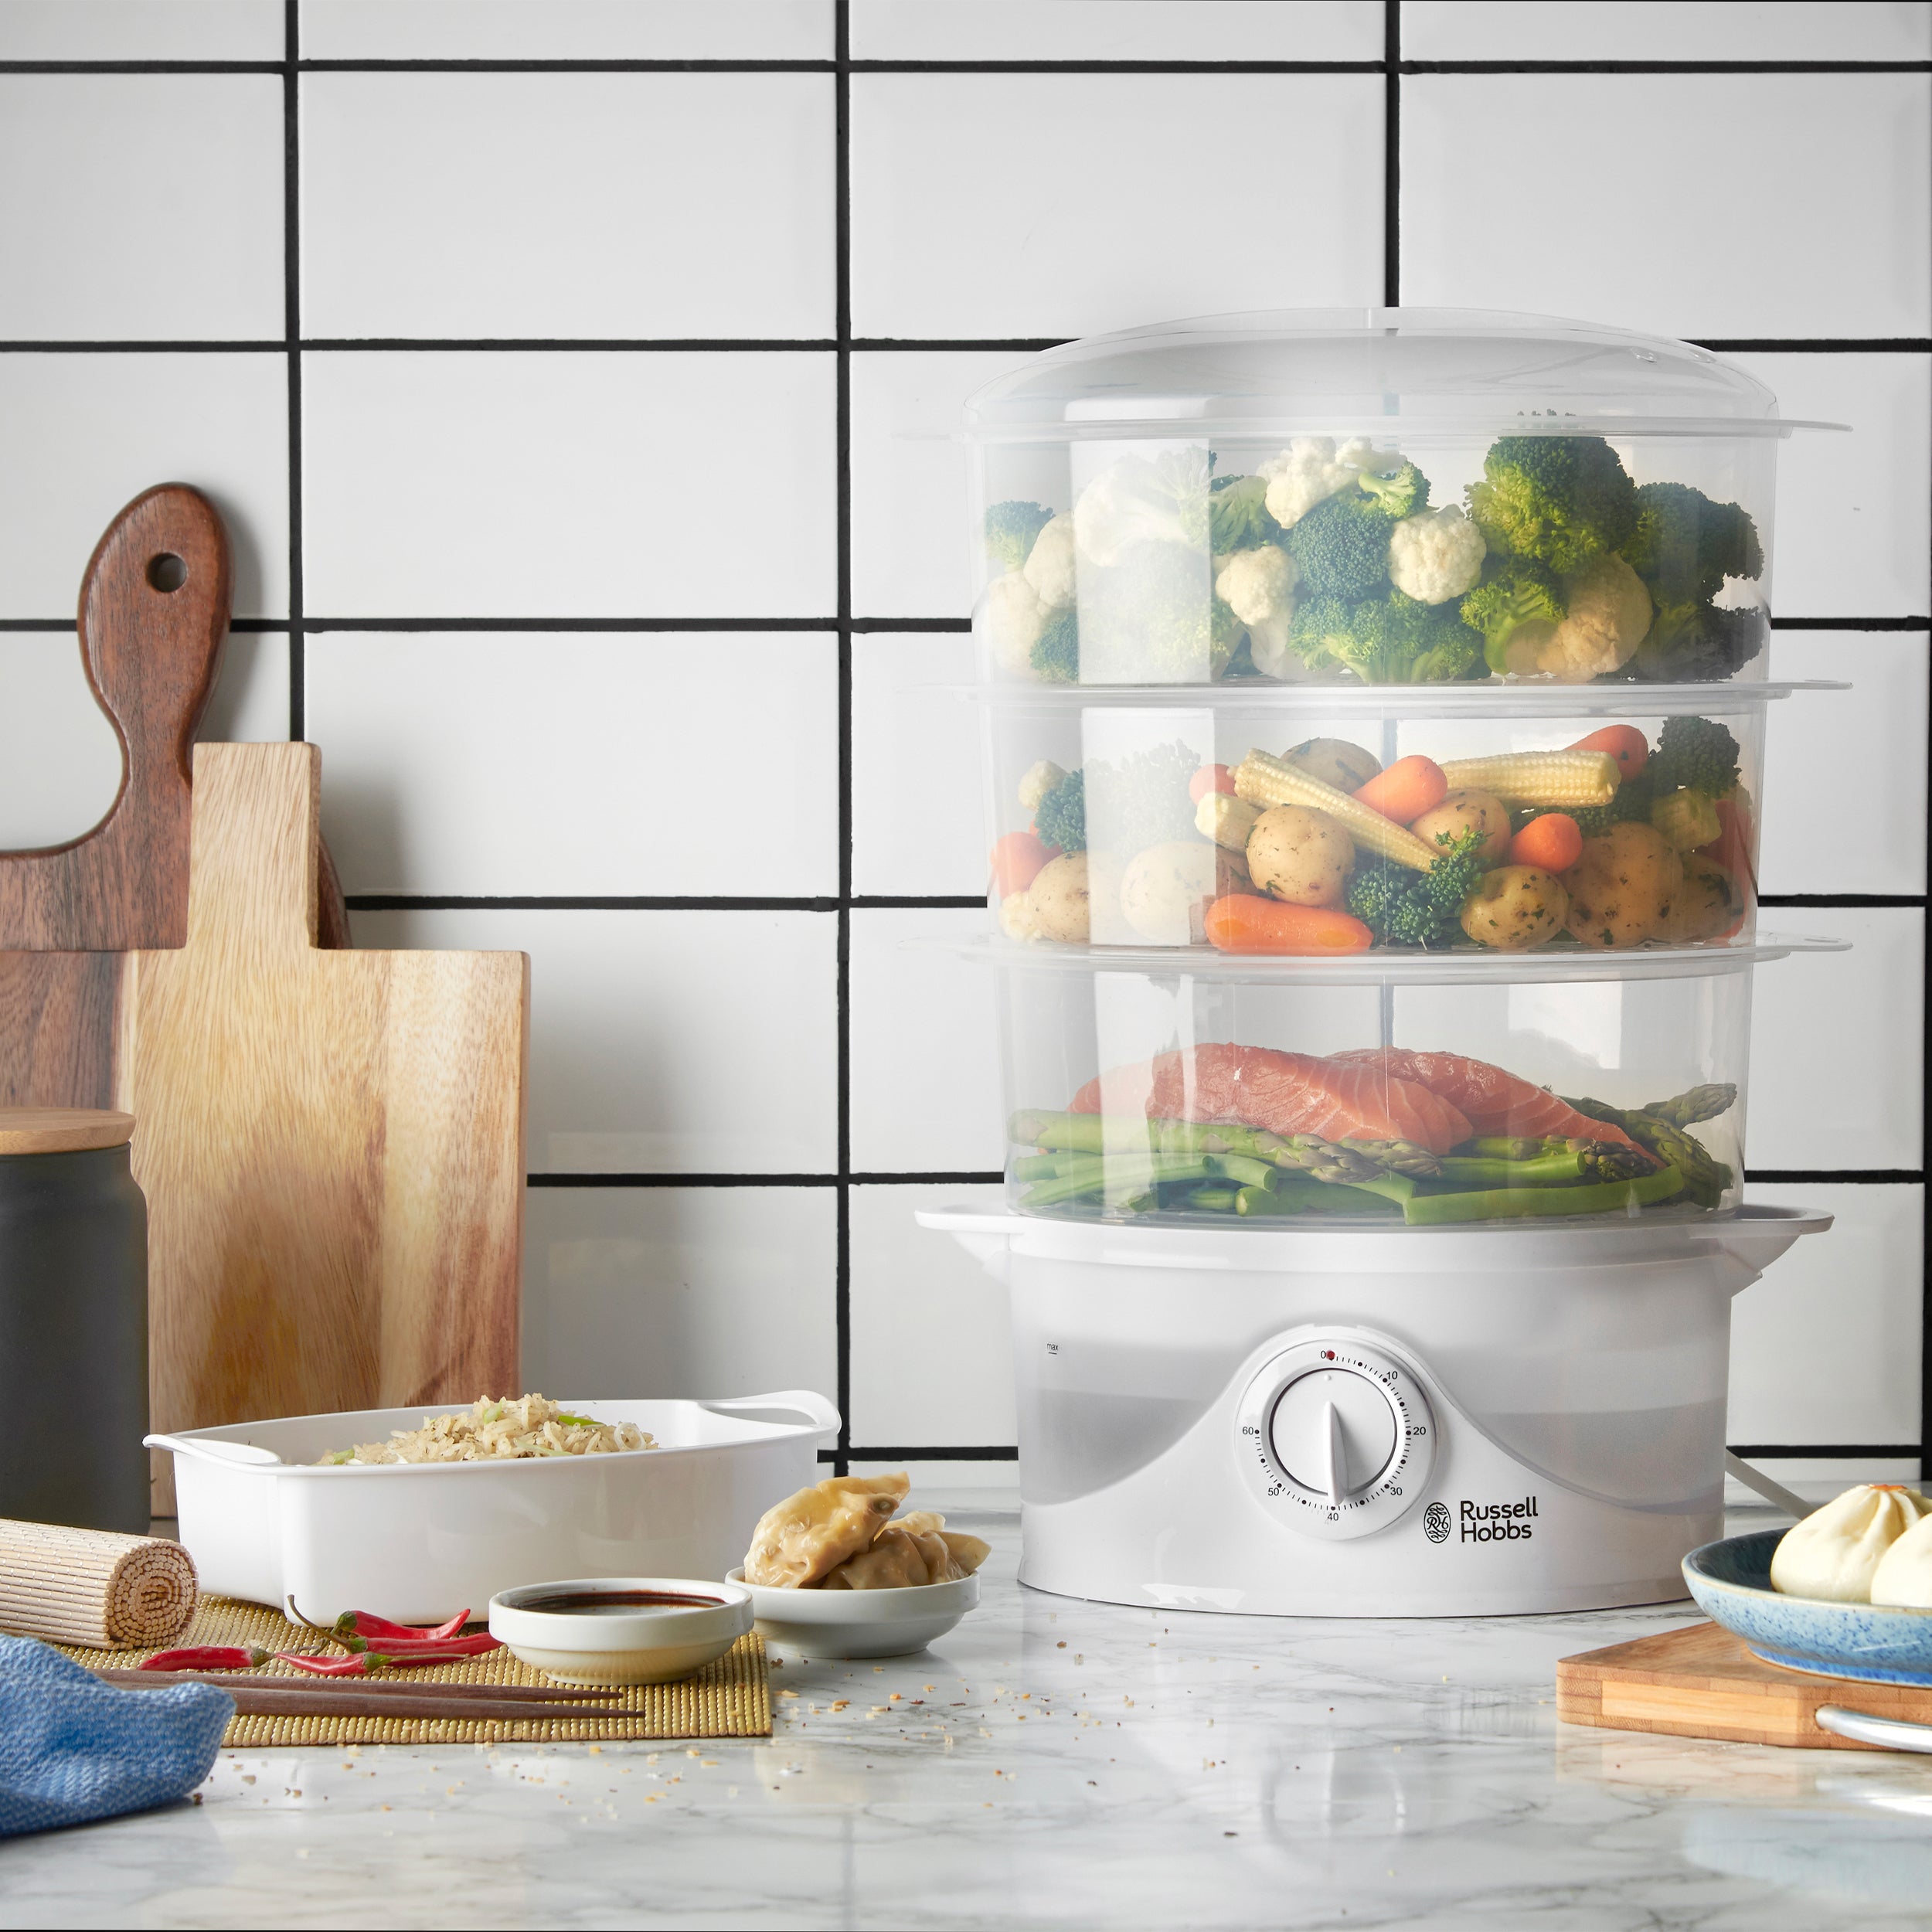 Shop Two Tier Food Steamer - Insanely Cool Products